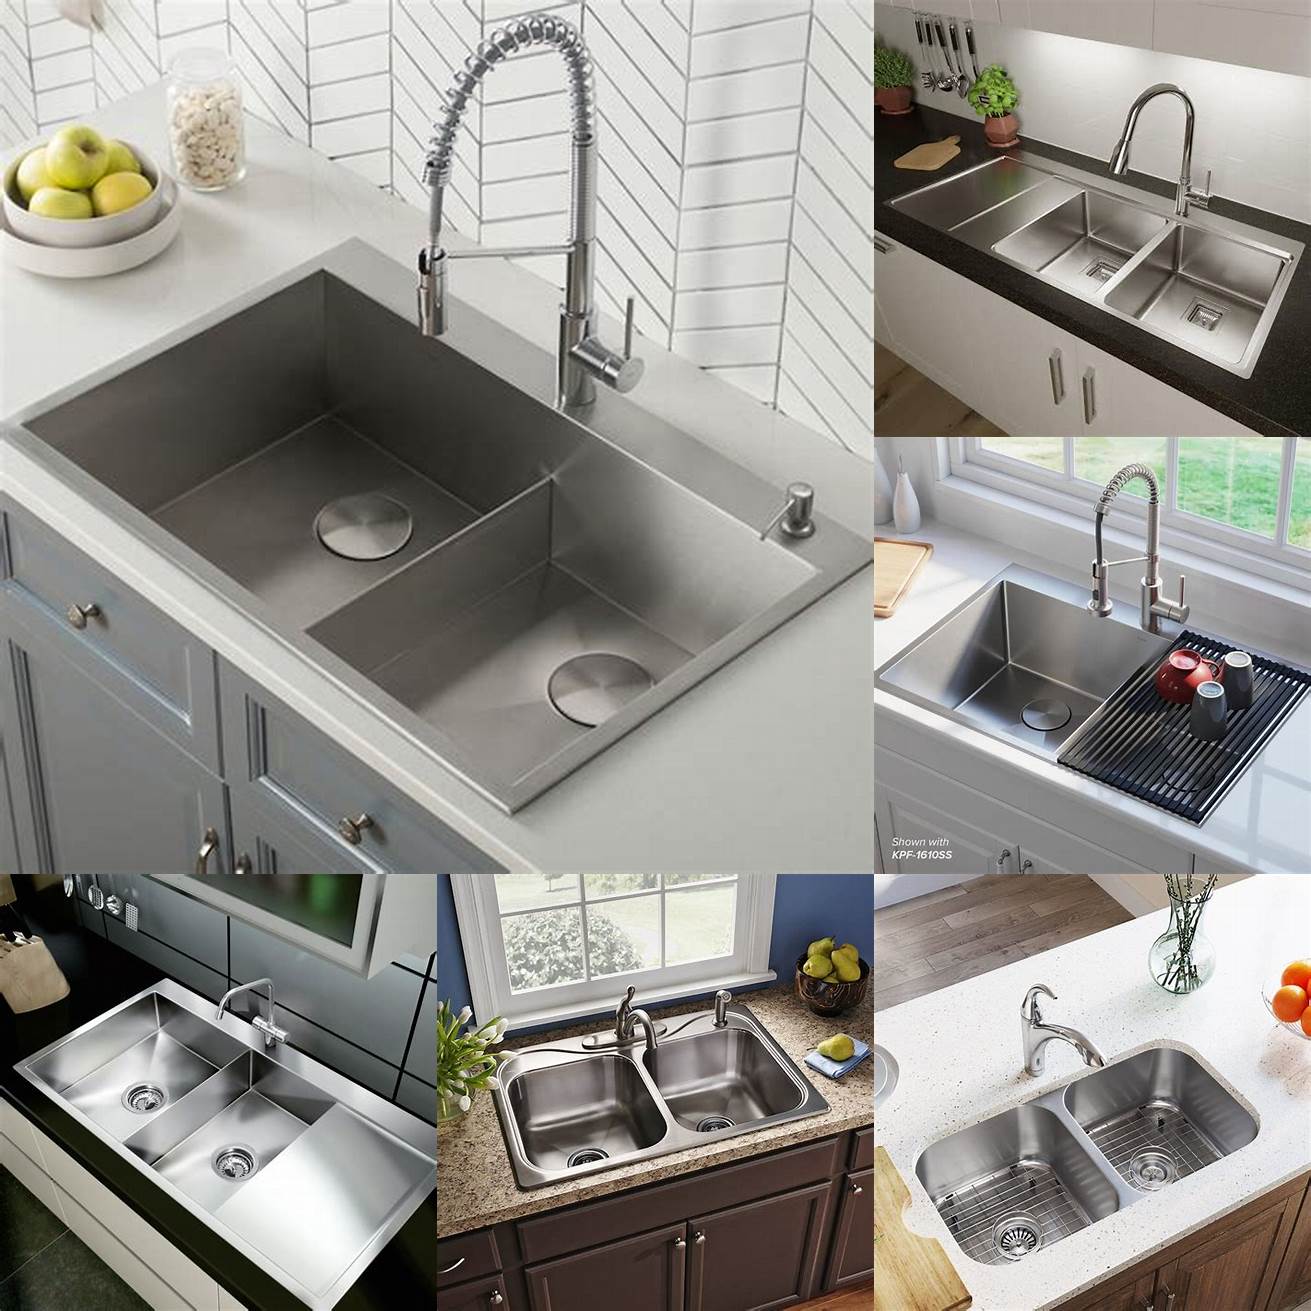 A picture of a stainless steel kitchen sink with two equal-sized bowls and a low arch faucet